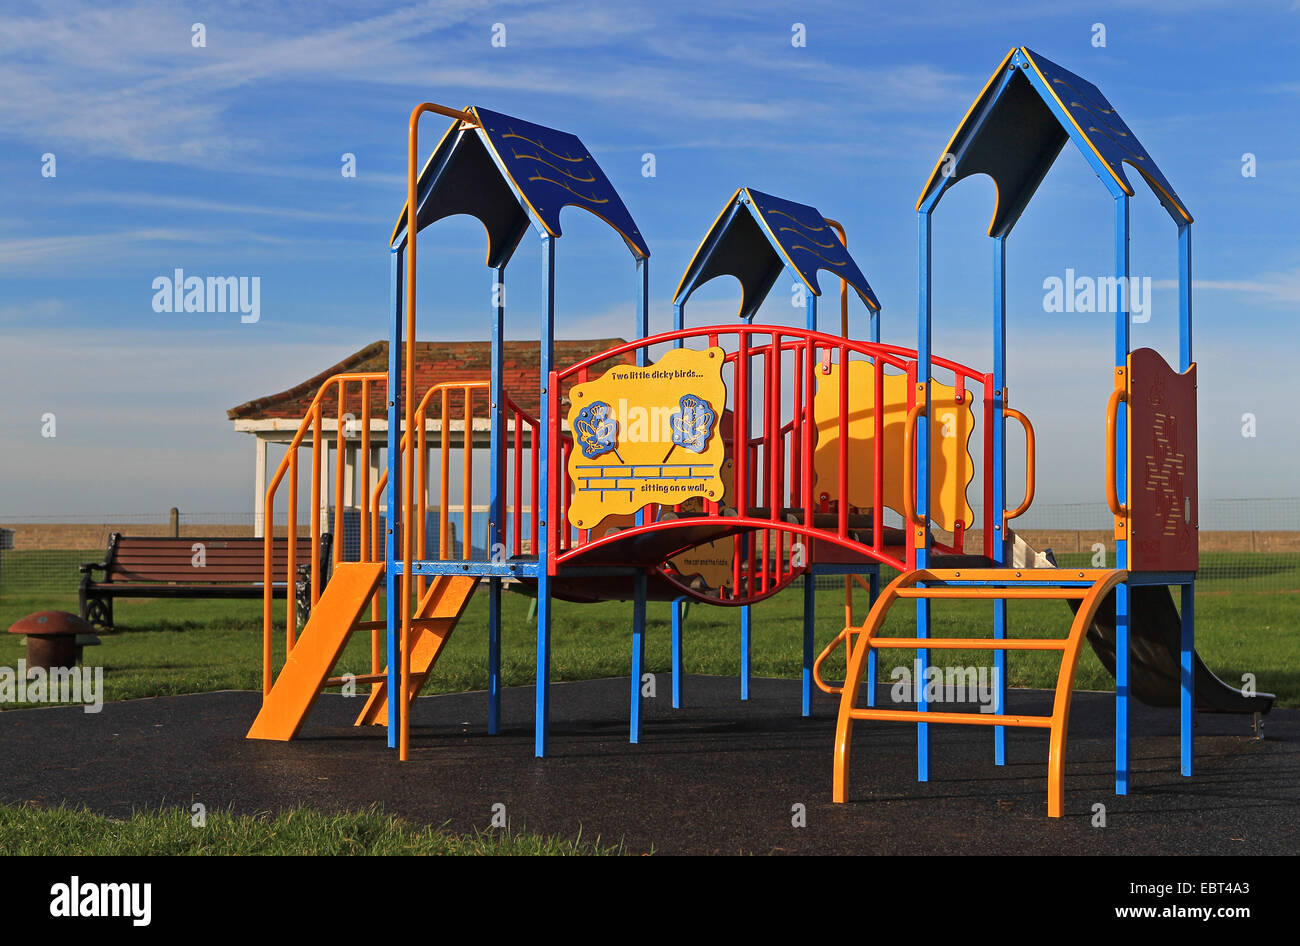 East Kent coast - Minnis Bay, England - colourful children's climbing frame in playground Stock Photo